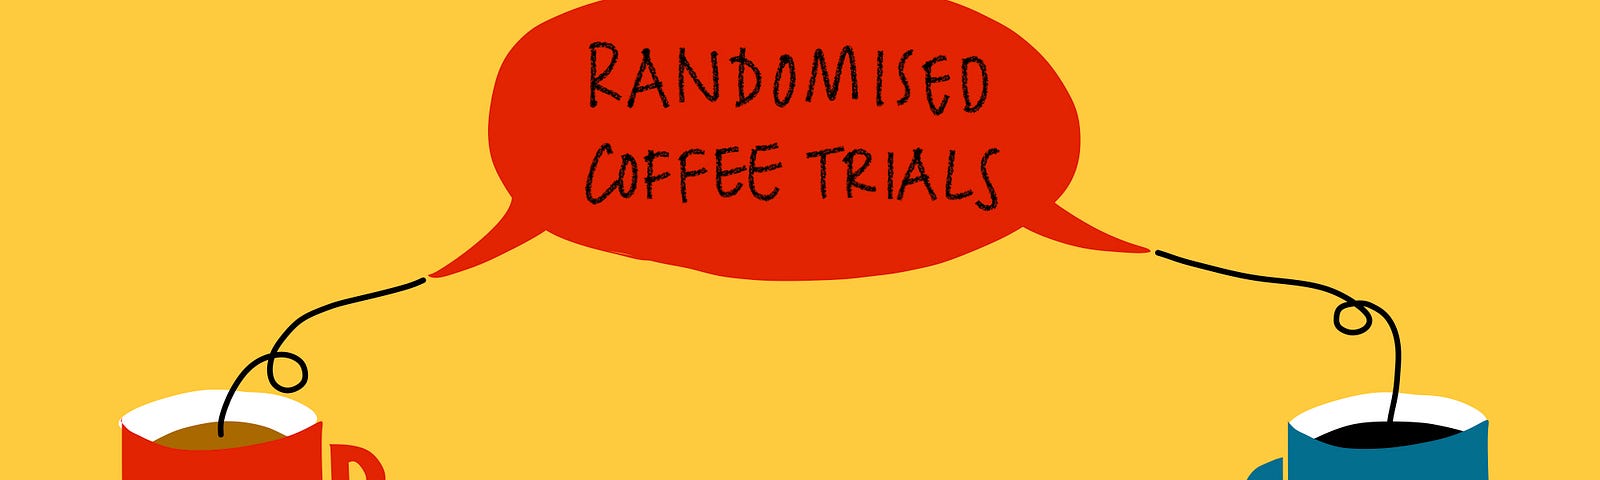 Illustration showing two cups of coffee connected by a speech bubble which says ‘Randomised Coffee Trials’.